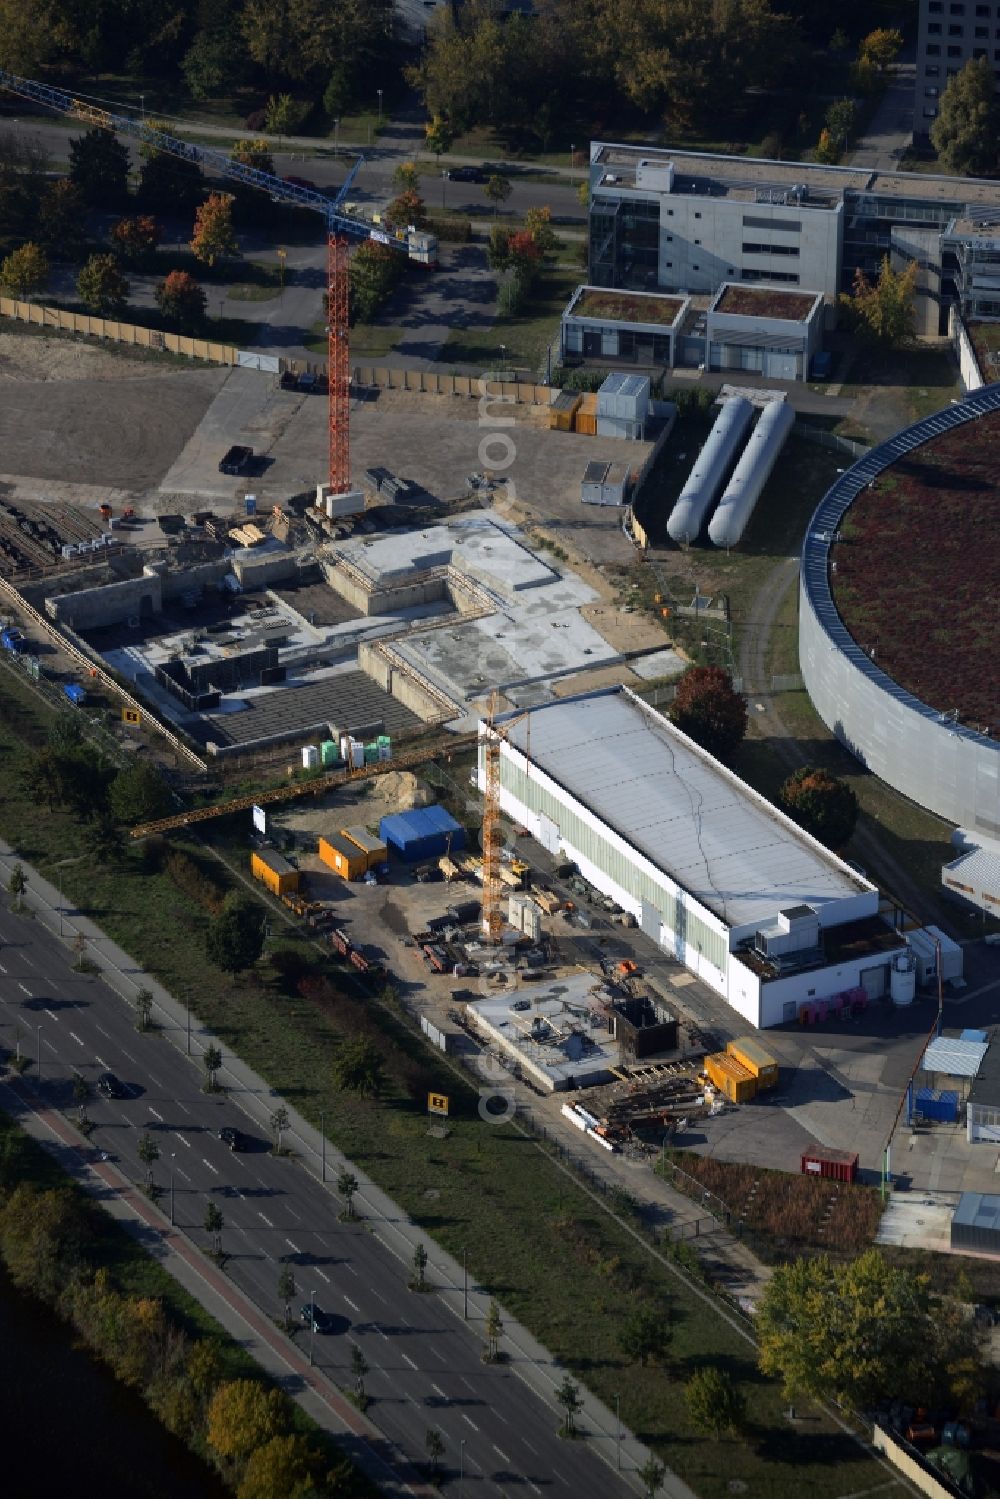 Aerial image Berlin - Expansion - Construction site at the electron storage ring BESSY - the third generation synchrotron radiation source in Berlin - Adlershof